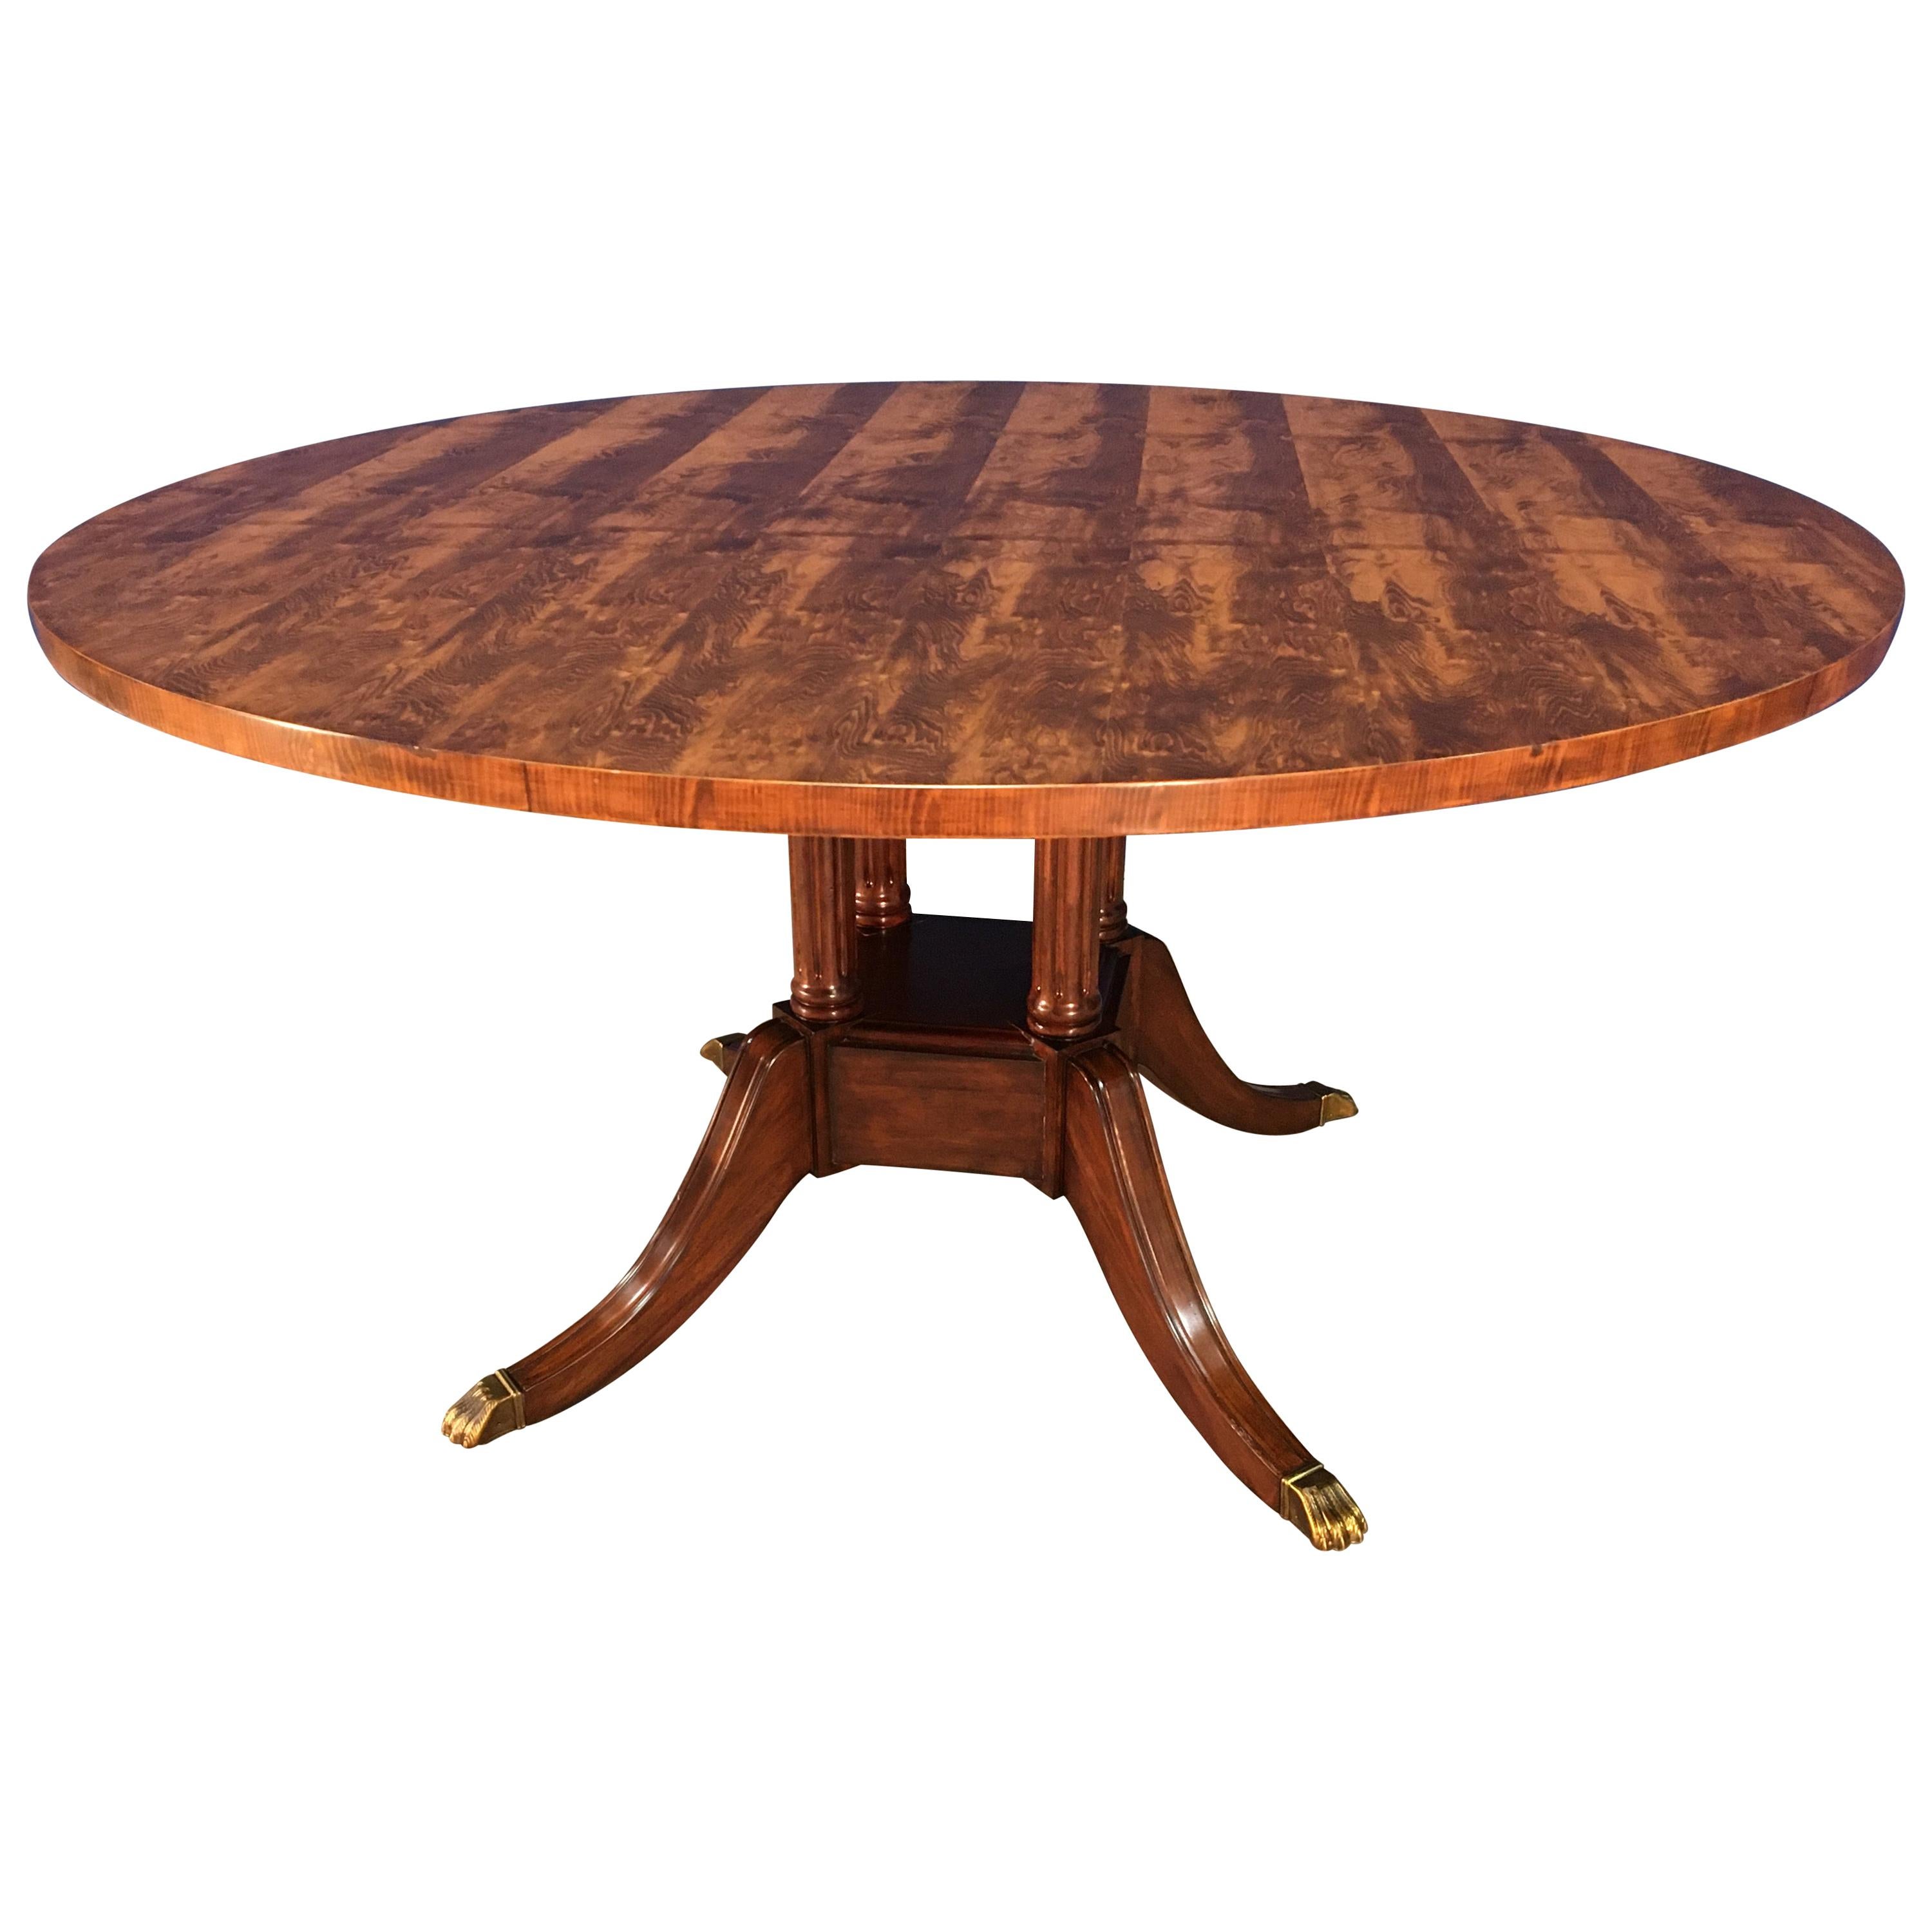 Round Yew Wood Georgian Style Pedestal Dining Table by Leighton Hall For Sale